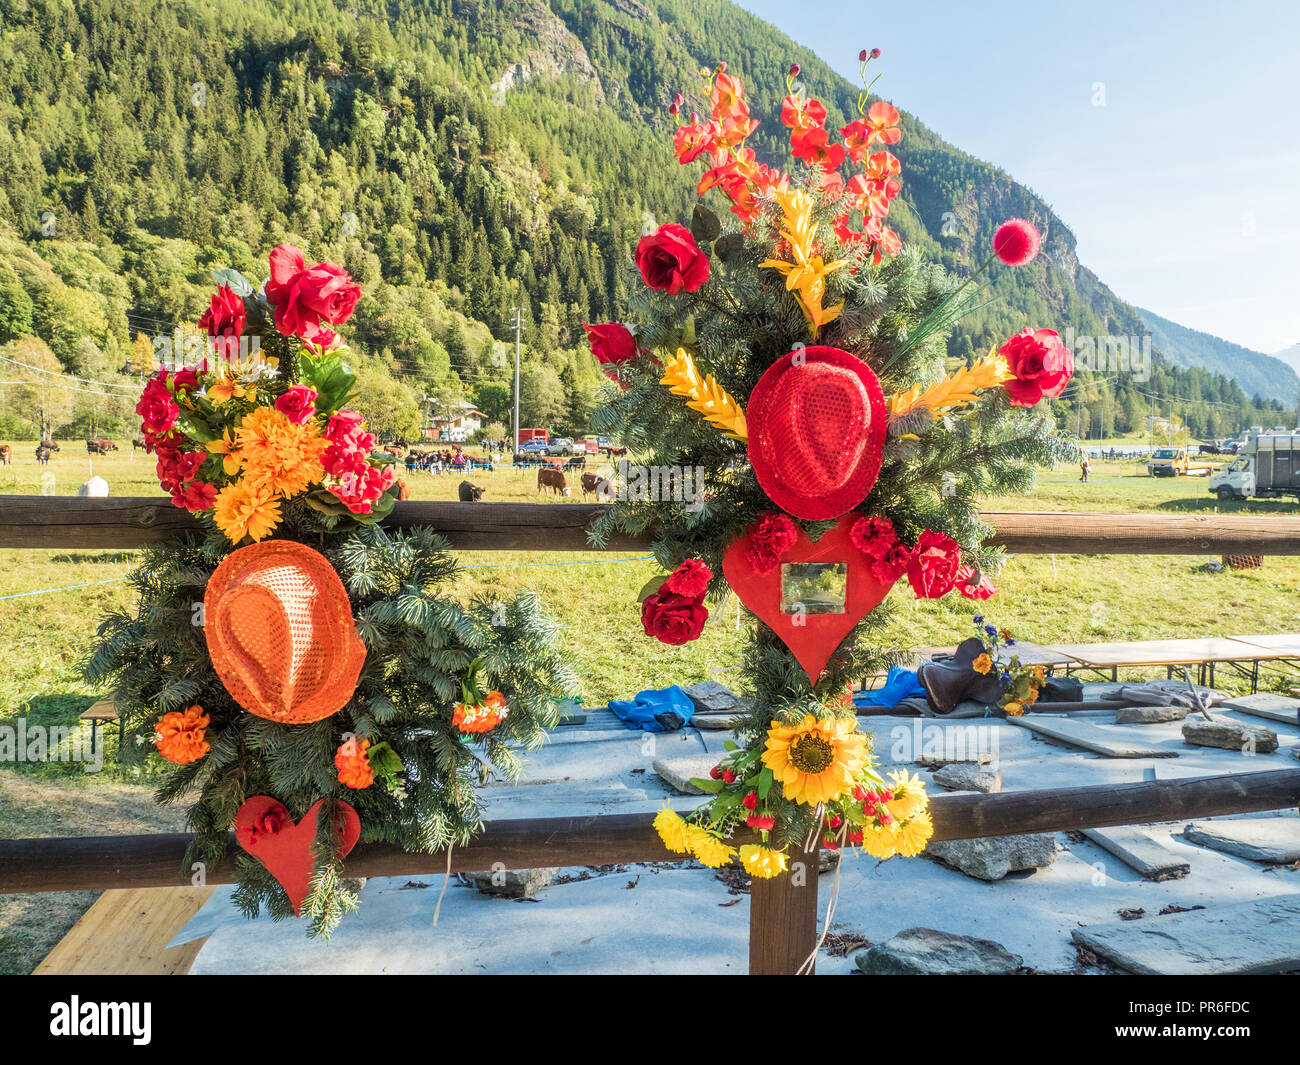 Floral display during a cow festival in village of Maen approx. 10km south of the town of Breuil Cervinia. Stock Photo